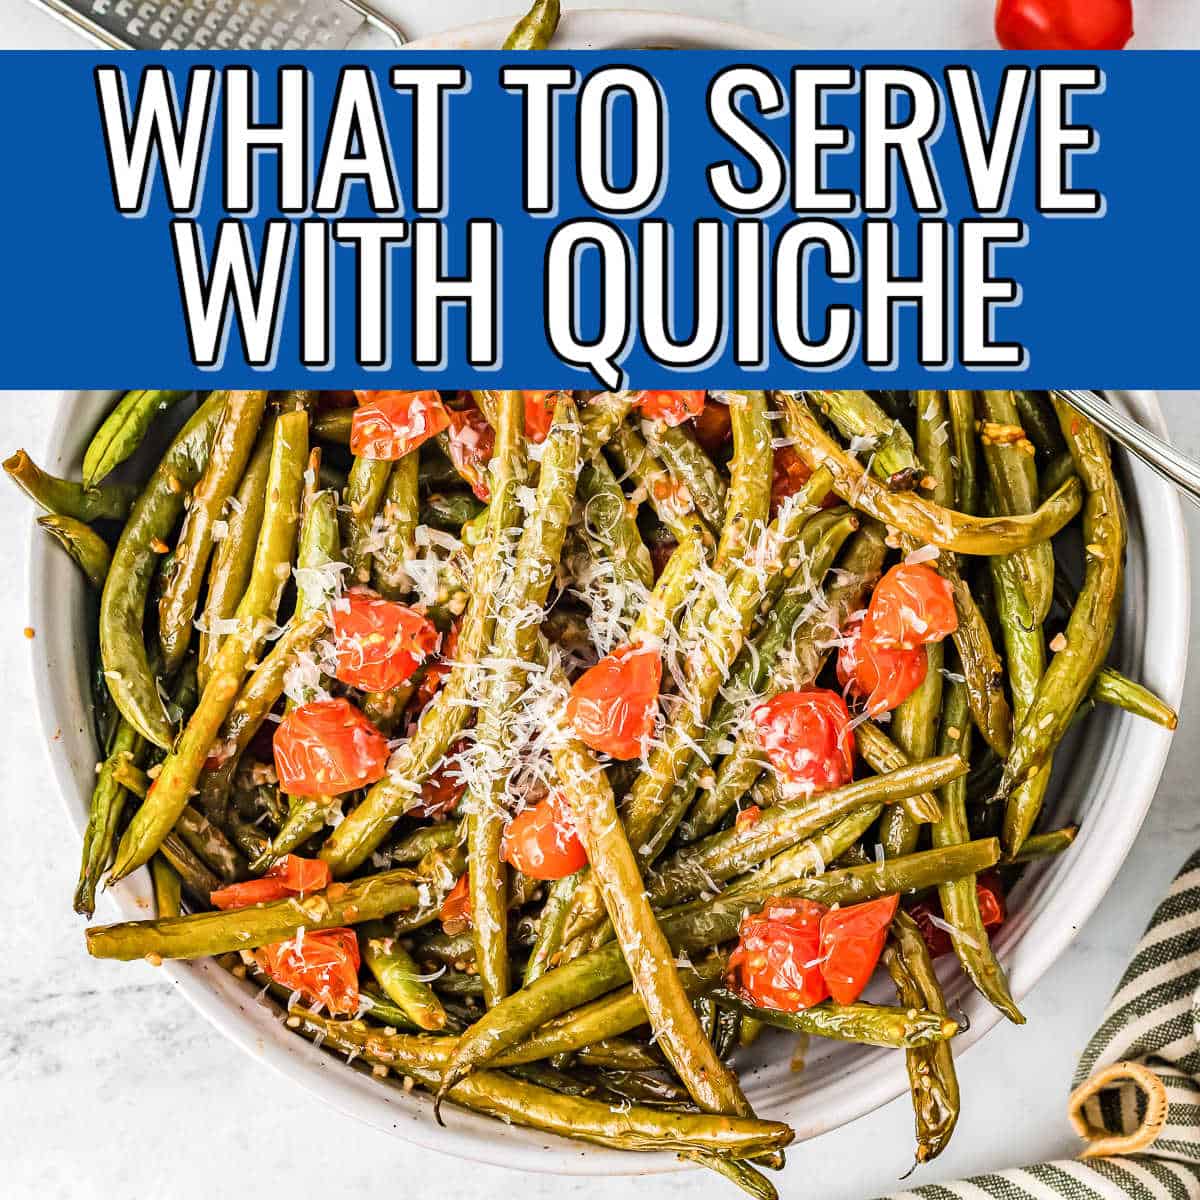 Roasted green beans with sliced cherry tomatoes and cheese in a white bowl, and blue square with title text at the top saying "what to serve with quiche?"